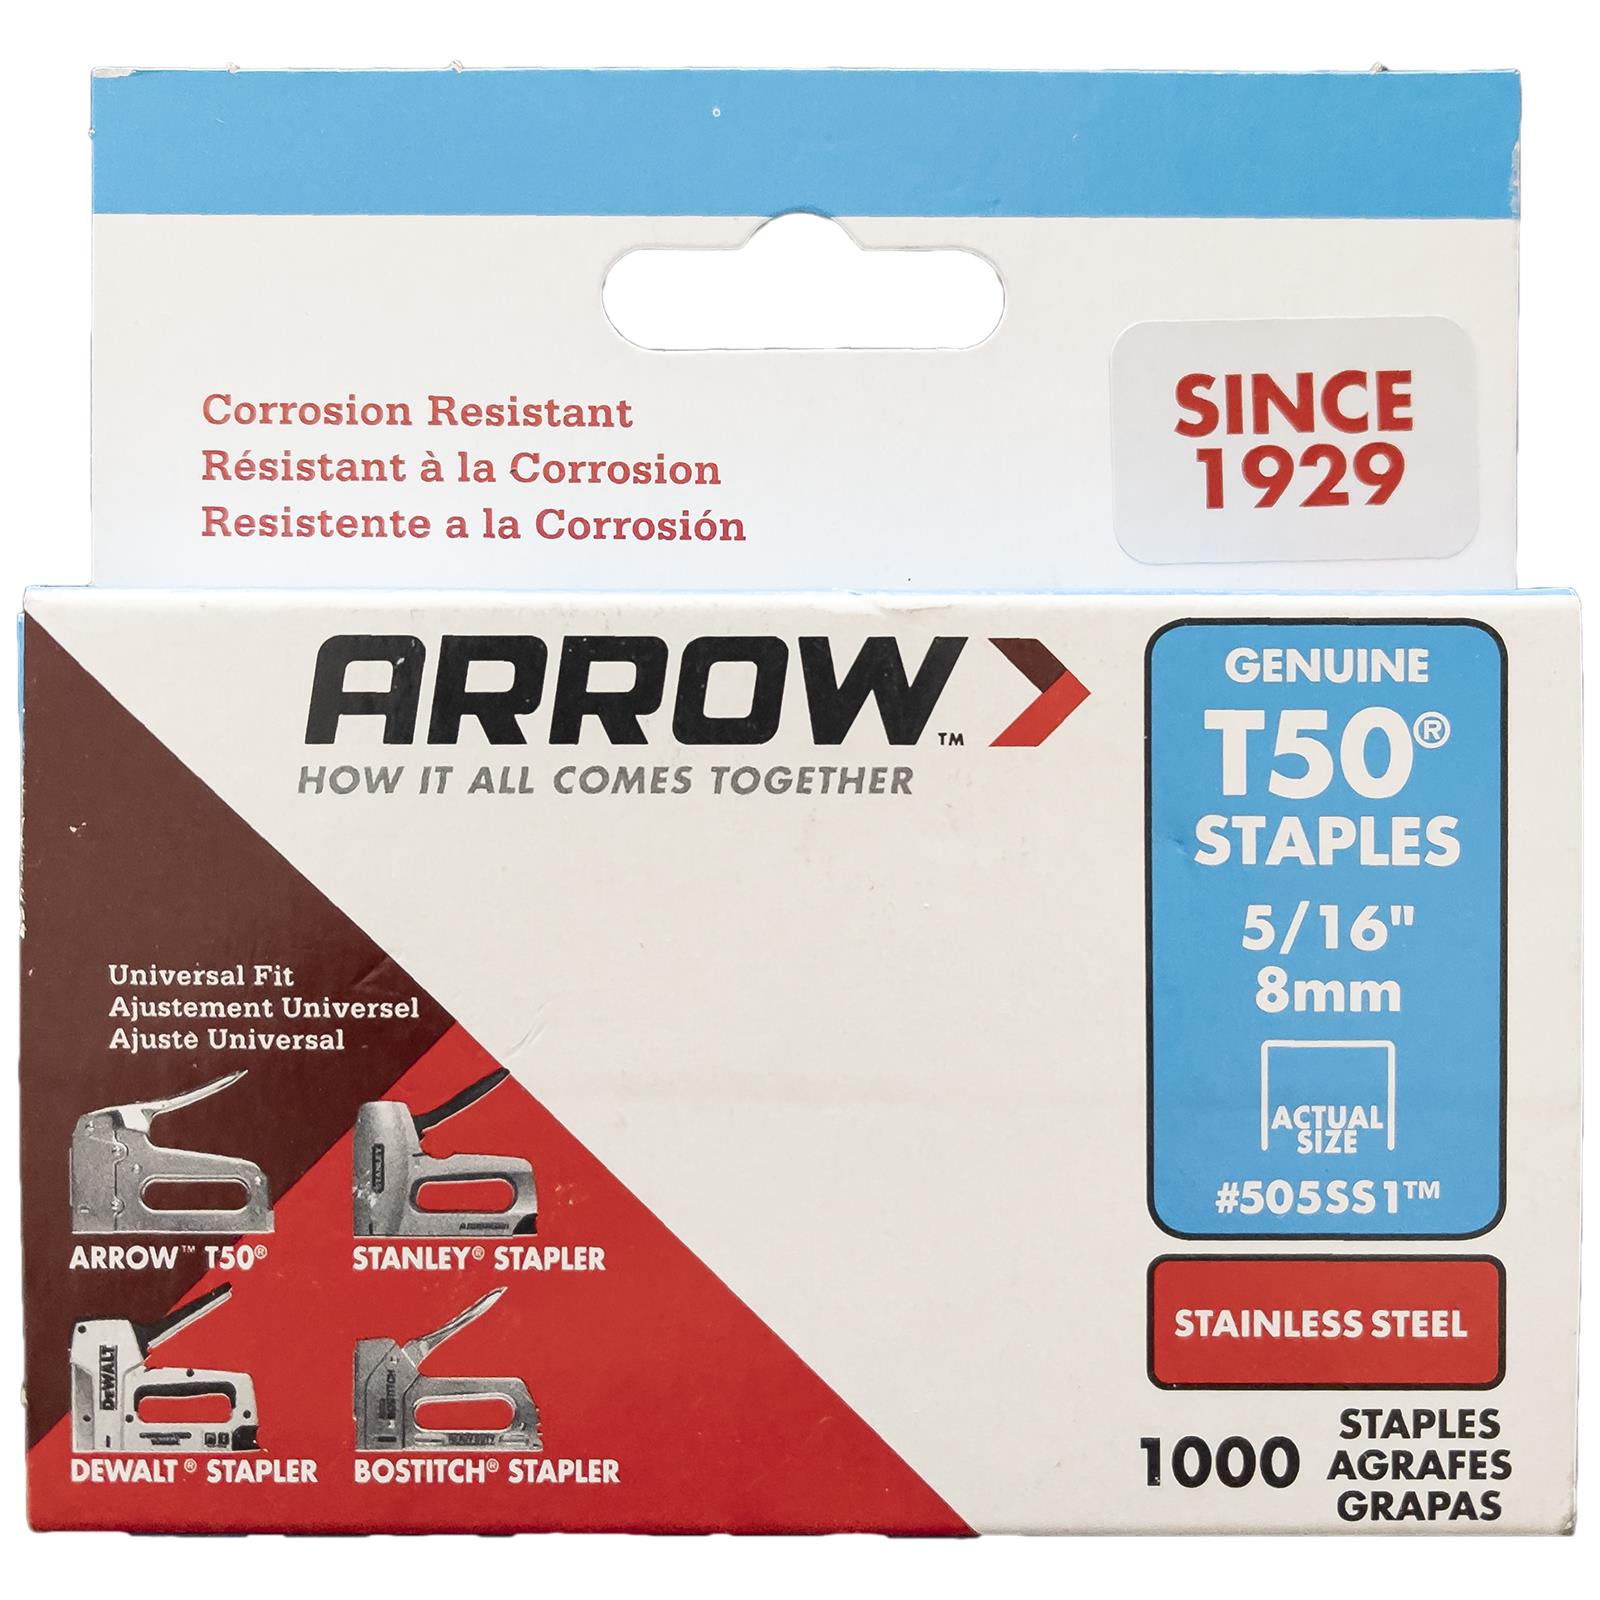 Arrow T50 Staples Stainless Steel 8mm Box of 1000